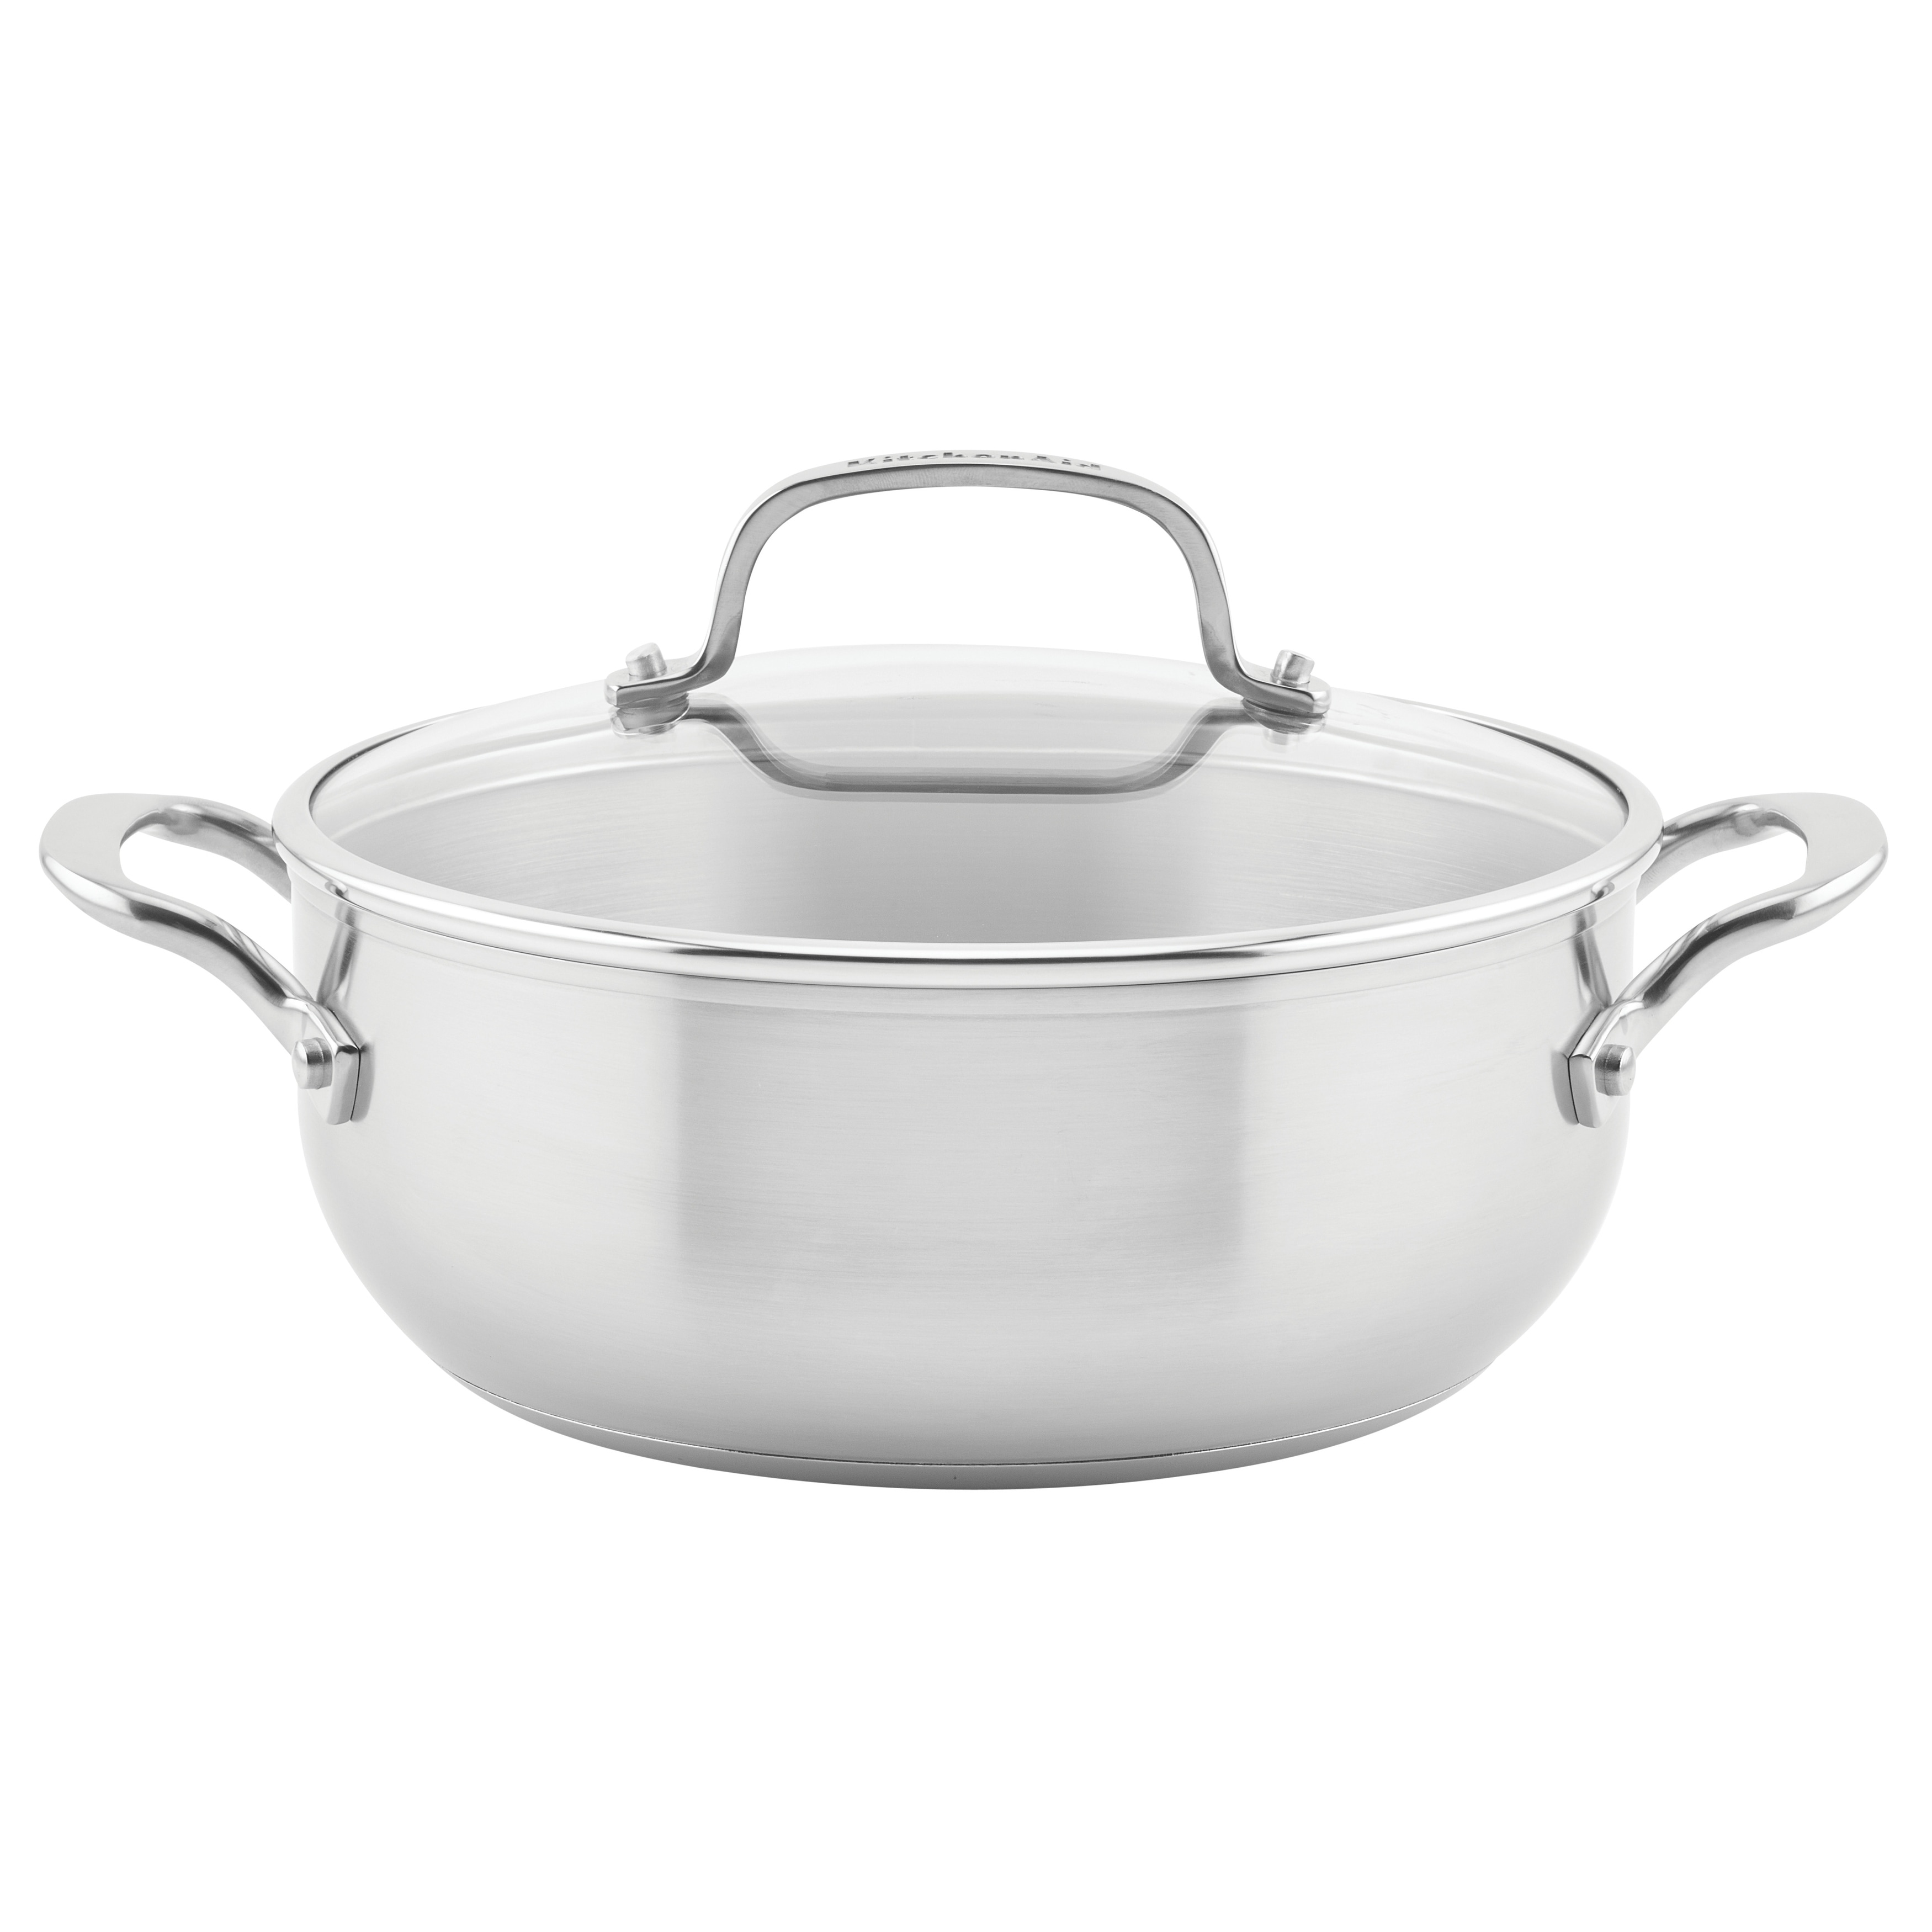 KitchenAid 3-Ply Base Stainless Steel Cookware Pots and Pans Set, 10 Piece,  Brushed Stainless